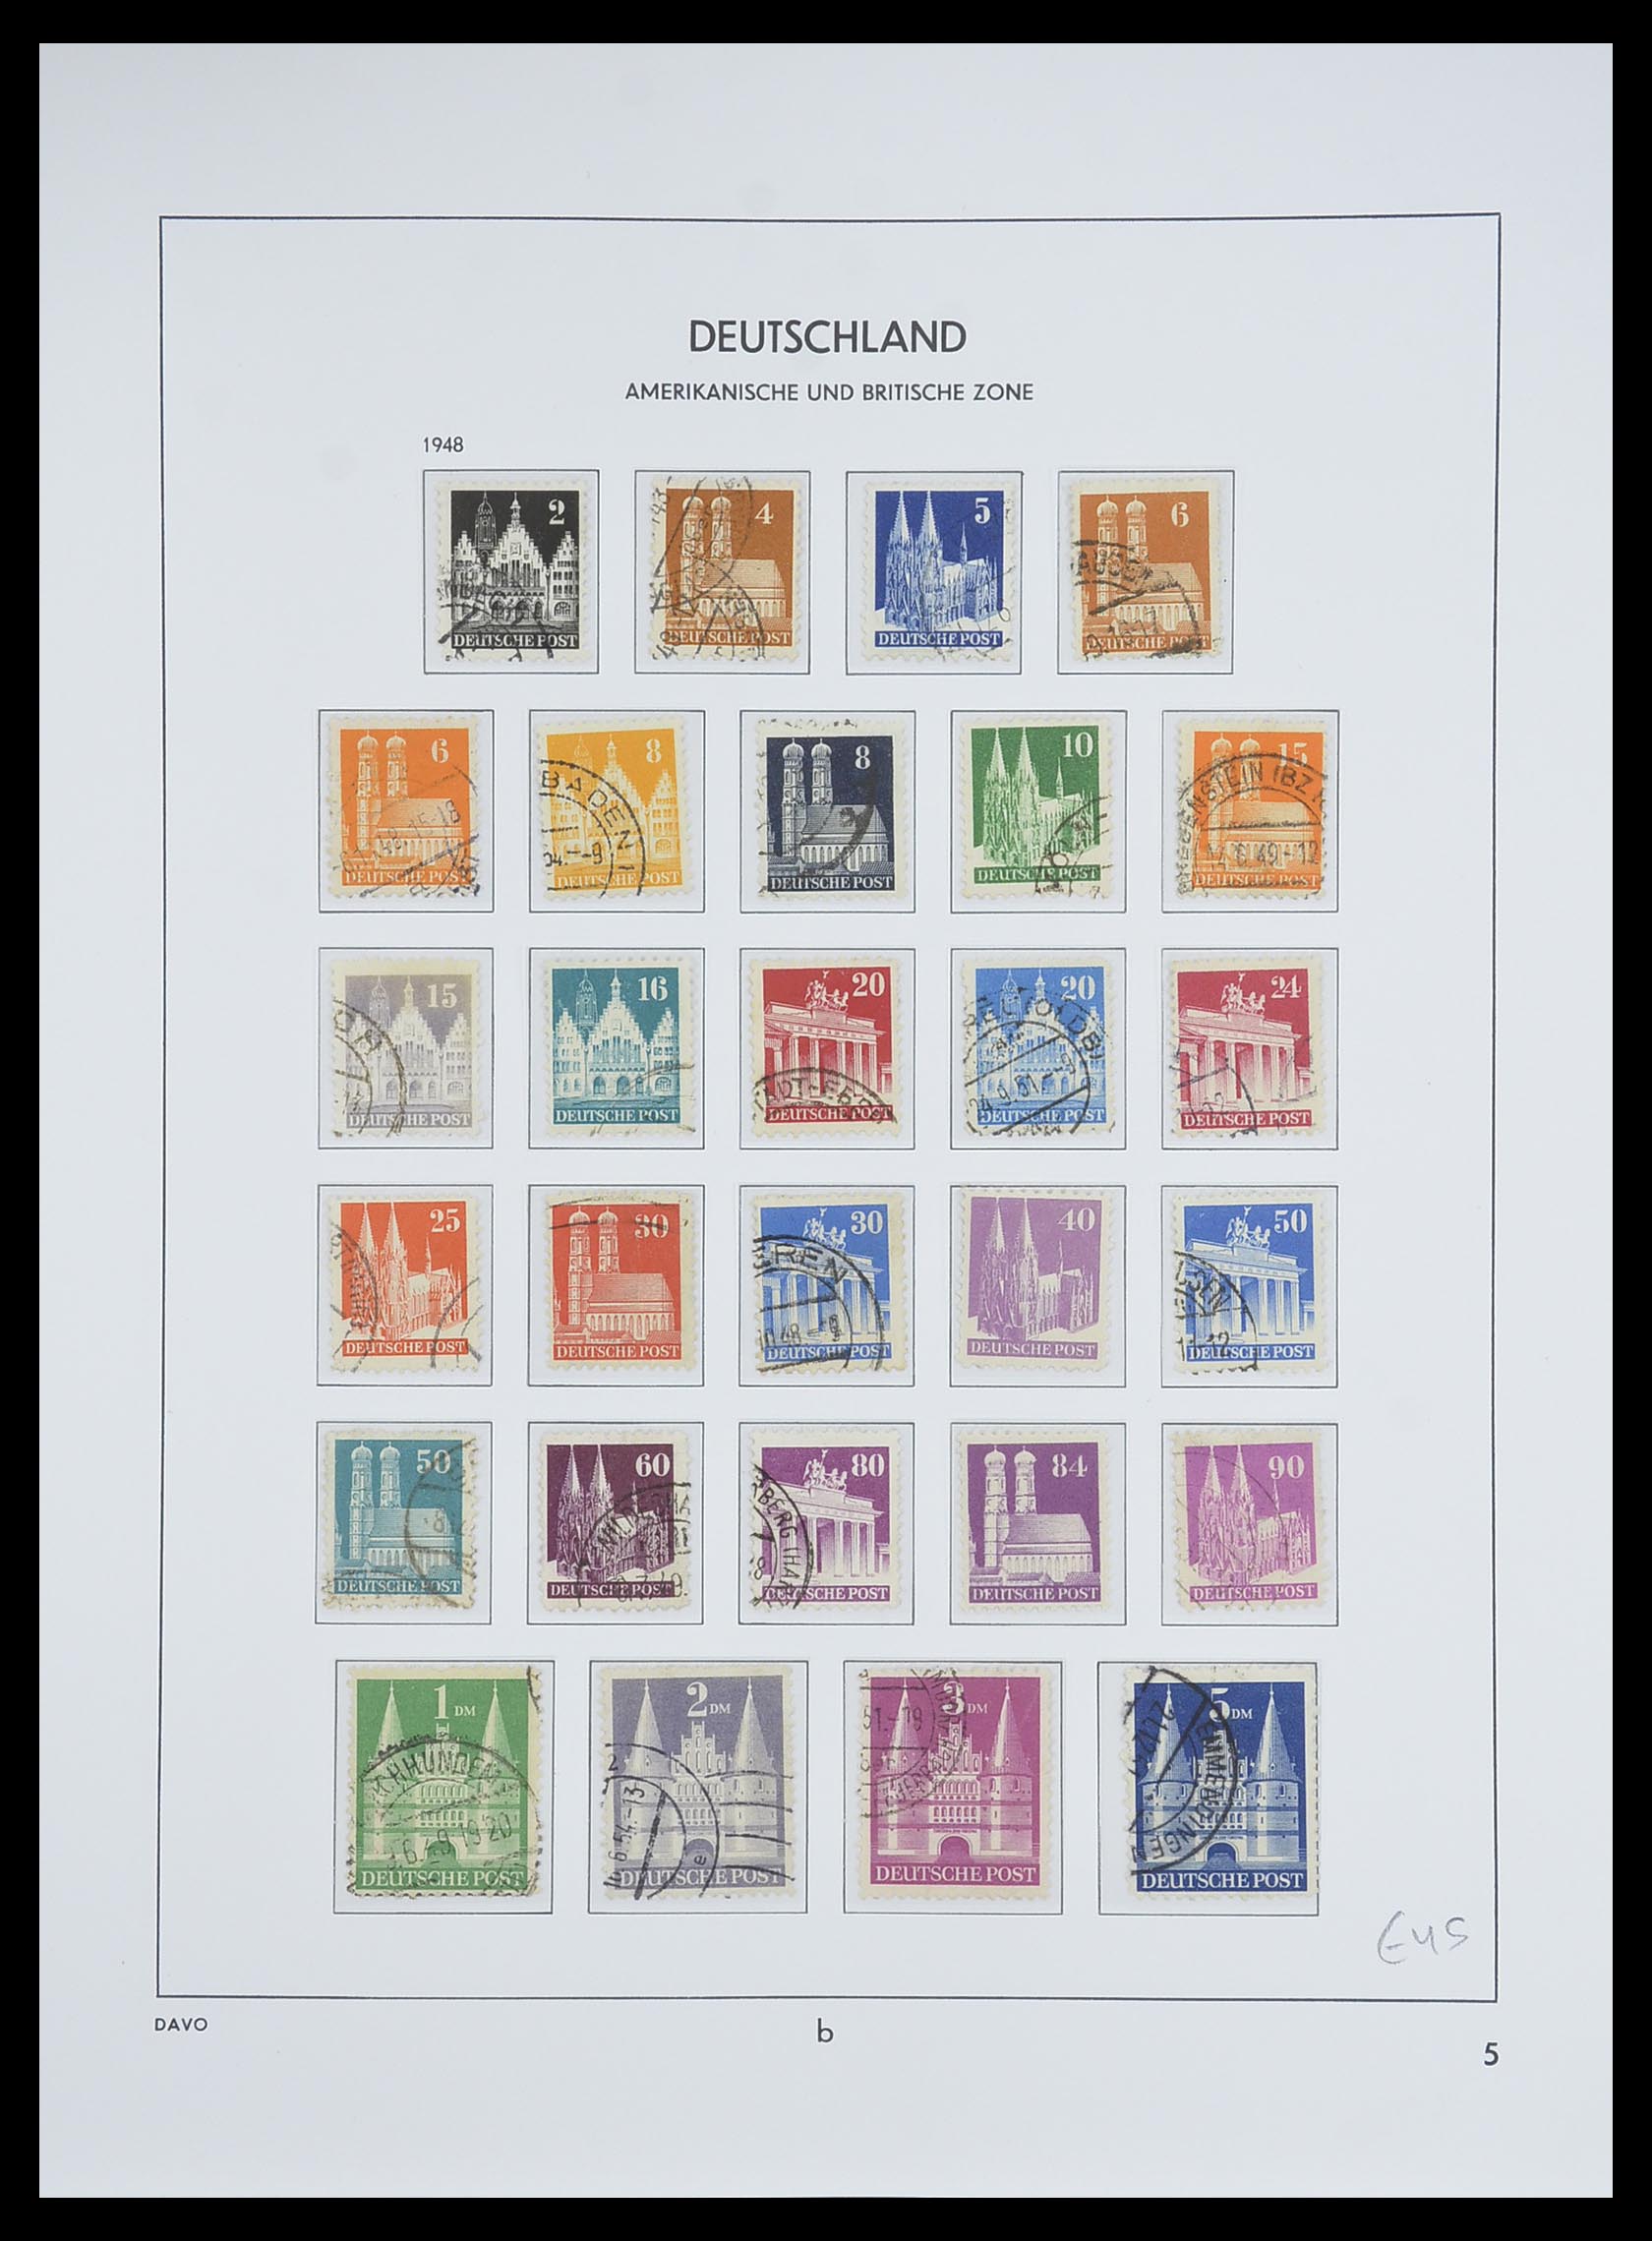 33754 013 - Stamp collection 33754 American-British Zone 1945-1948.